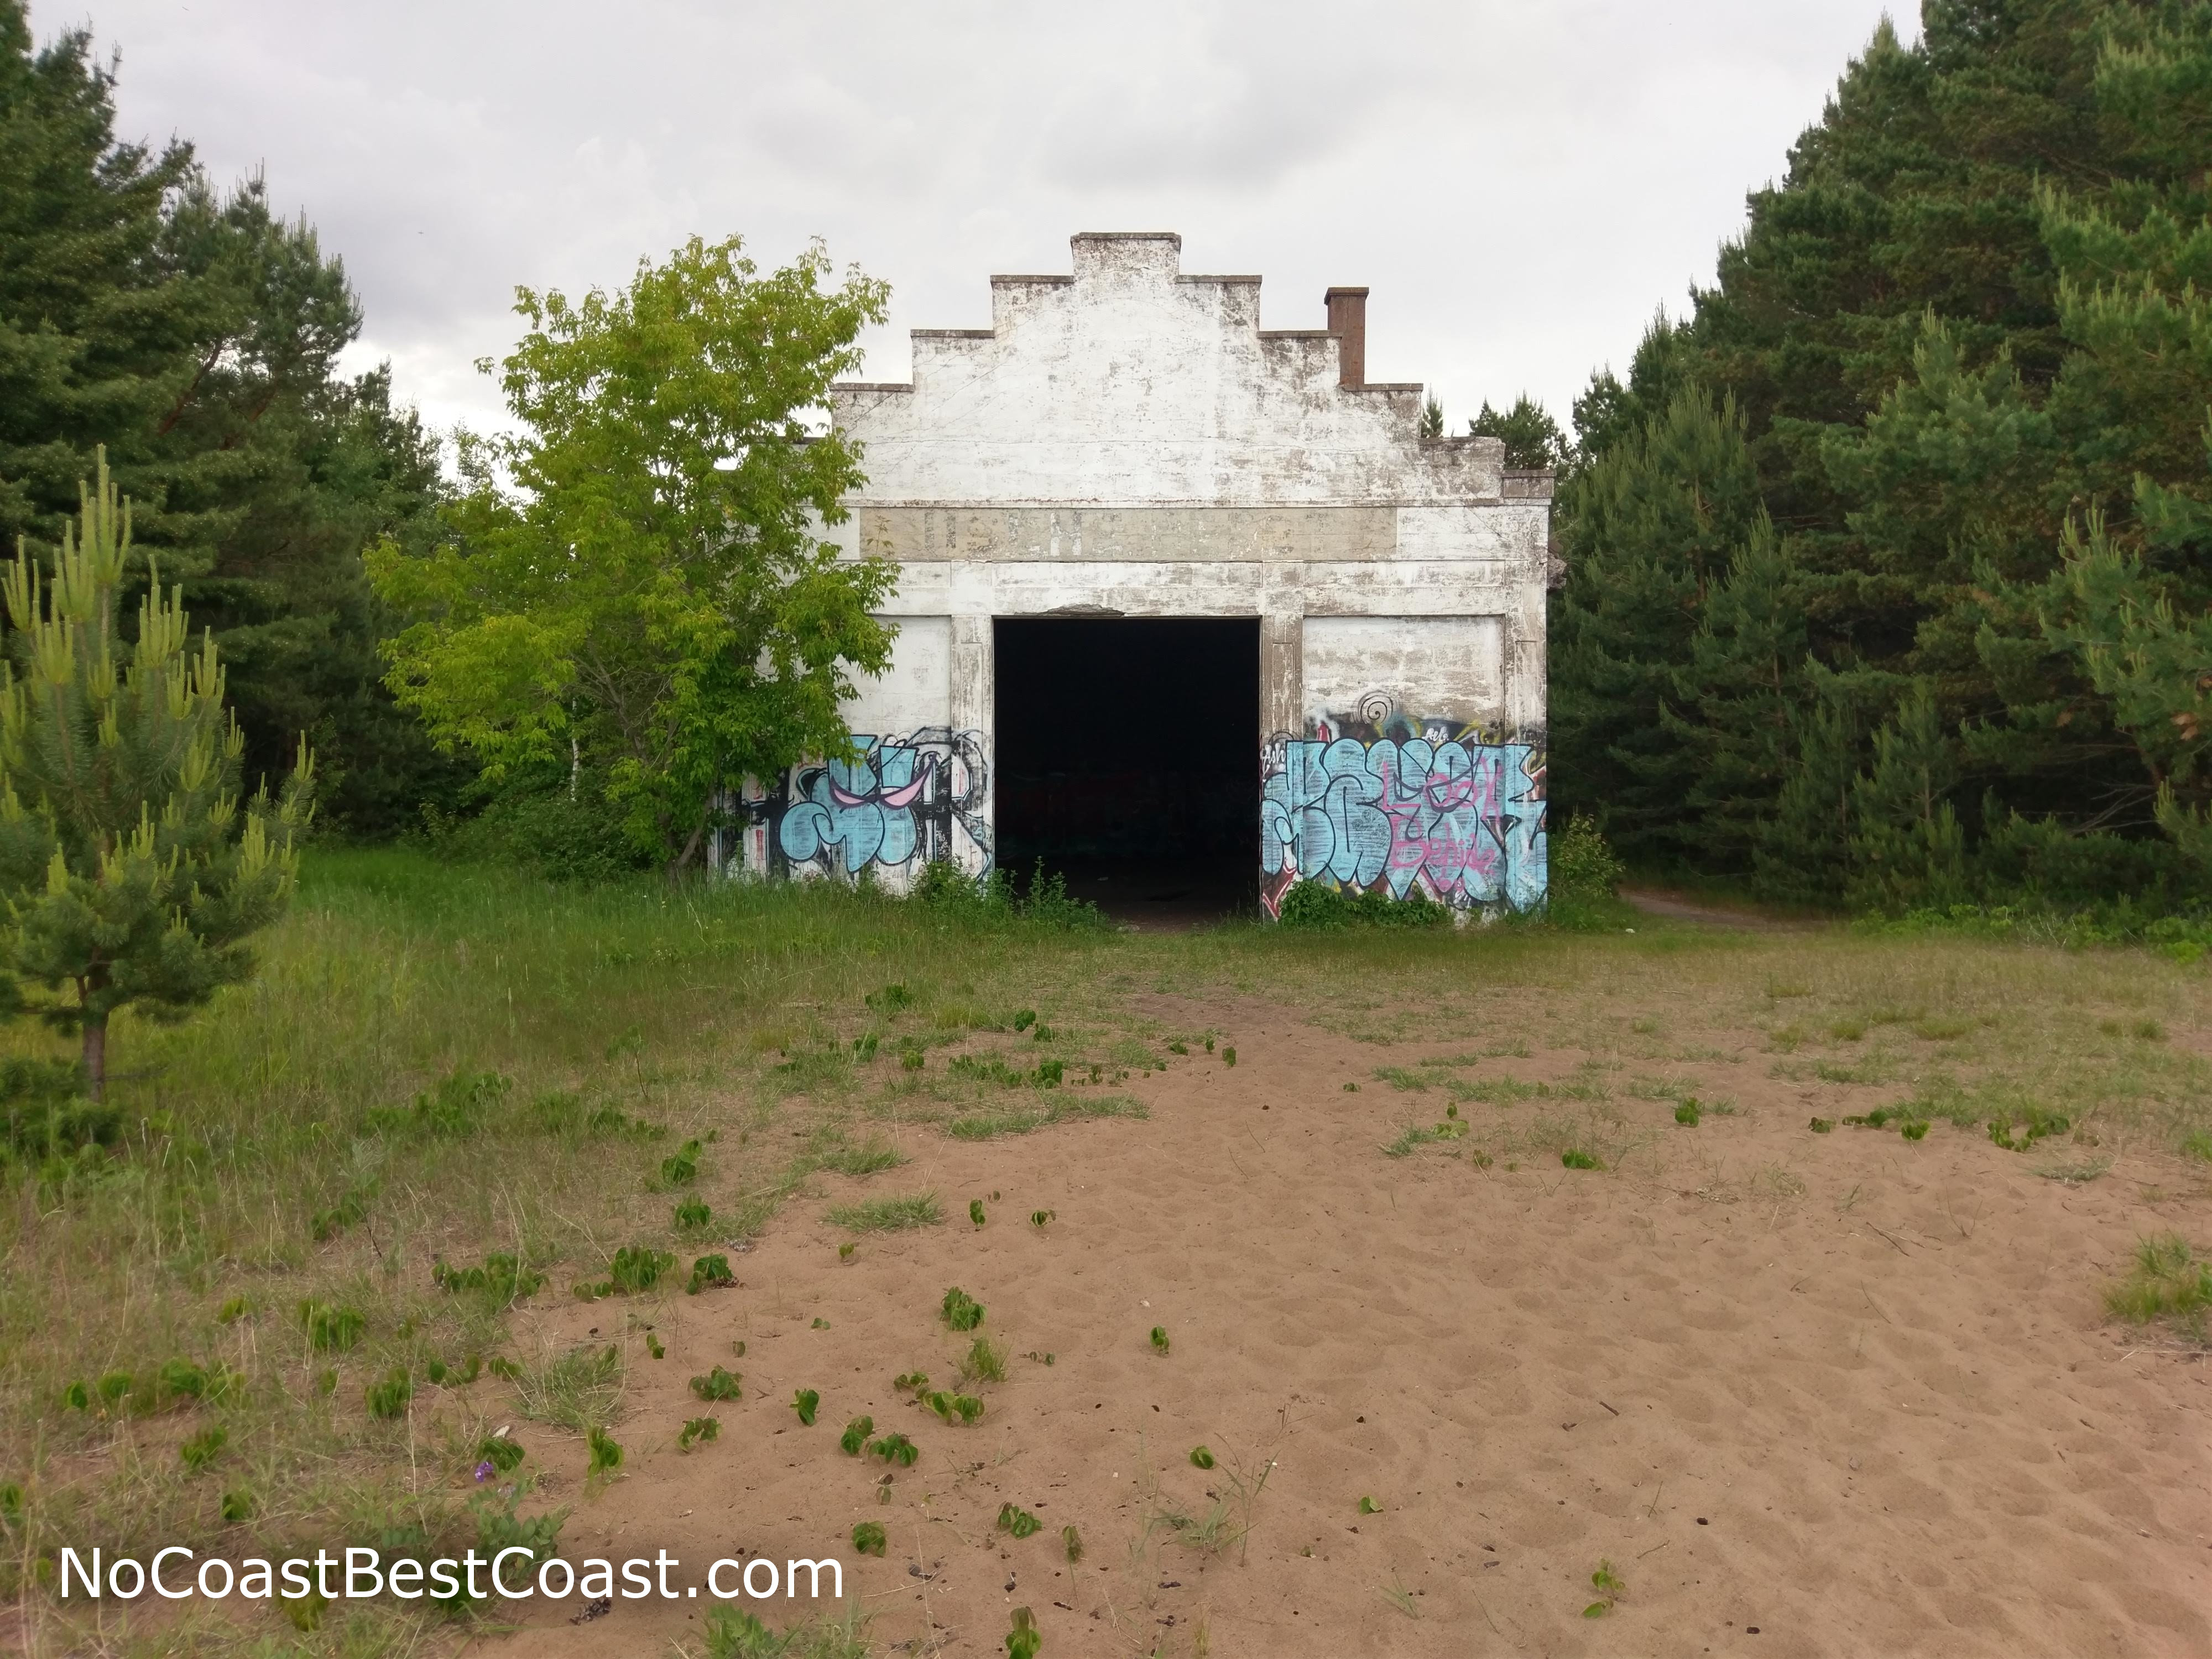 This ruined building is an interesting attraction for urban explorers or graffiti aficionados